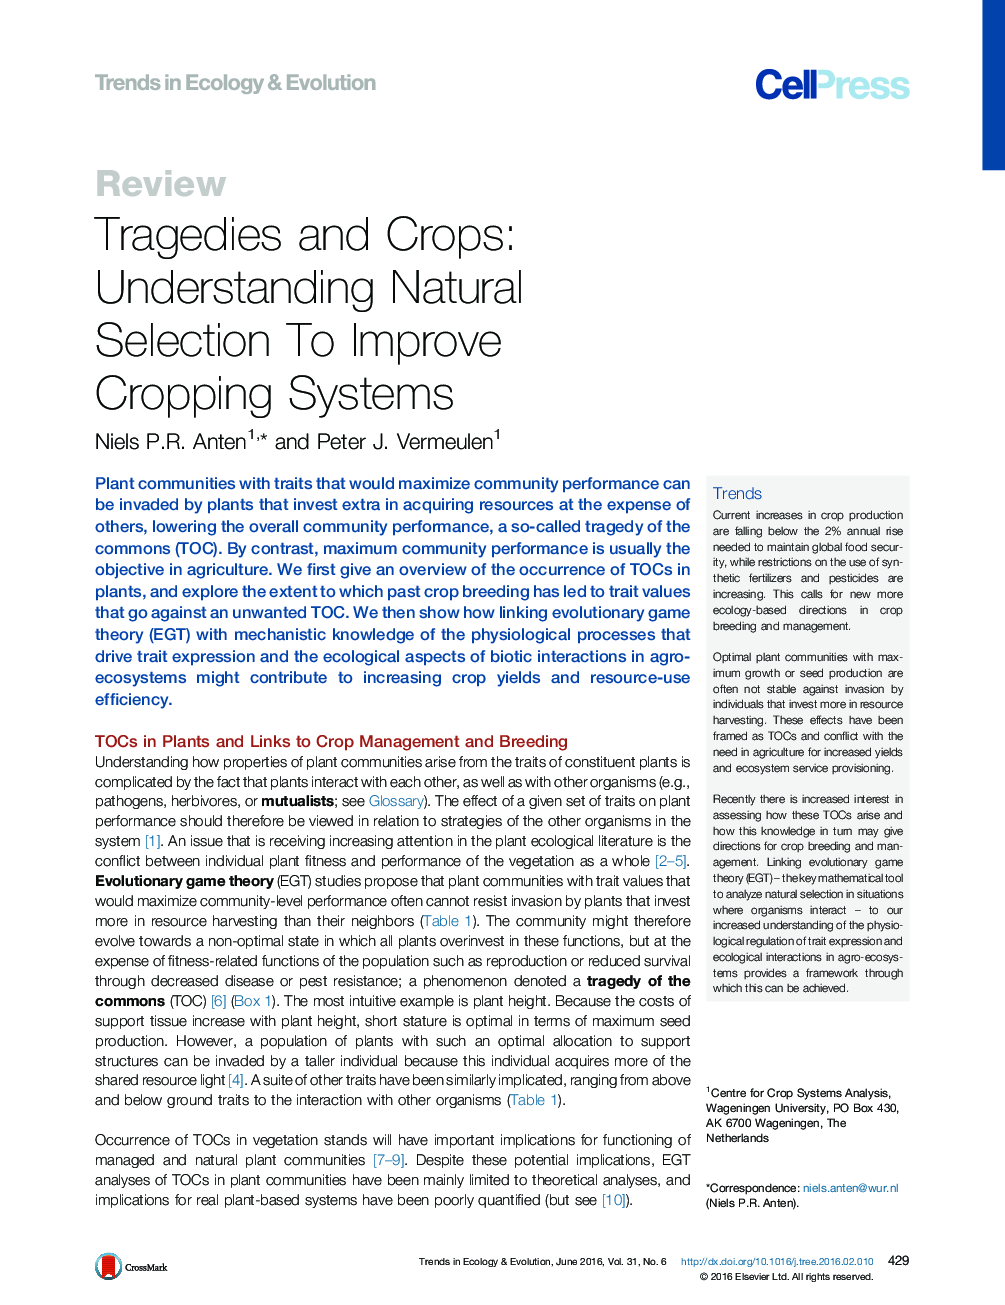 Tragedies and Crops: Understanding Natural Selection To Improve Cropping Systems